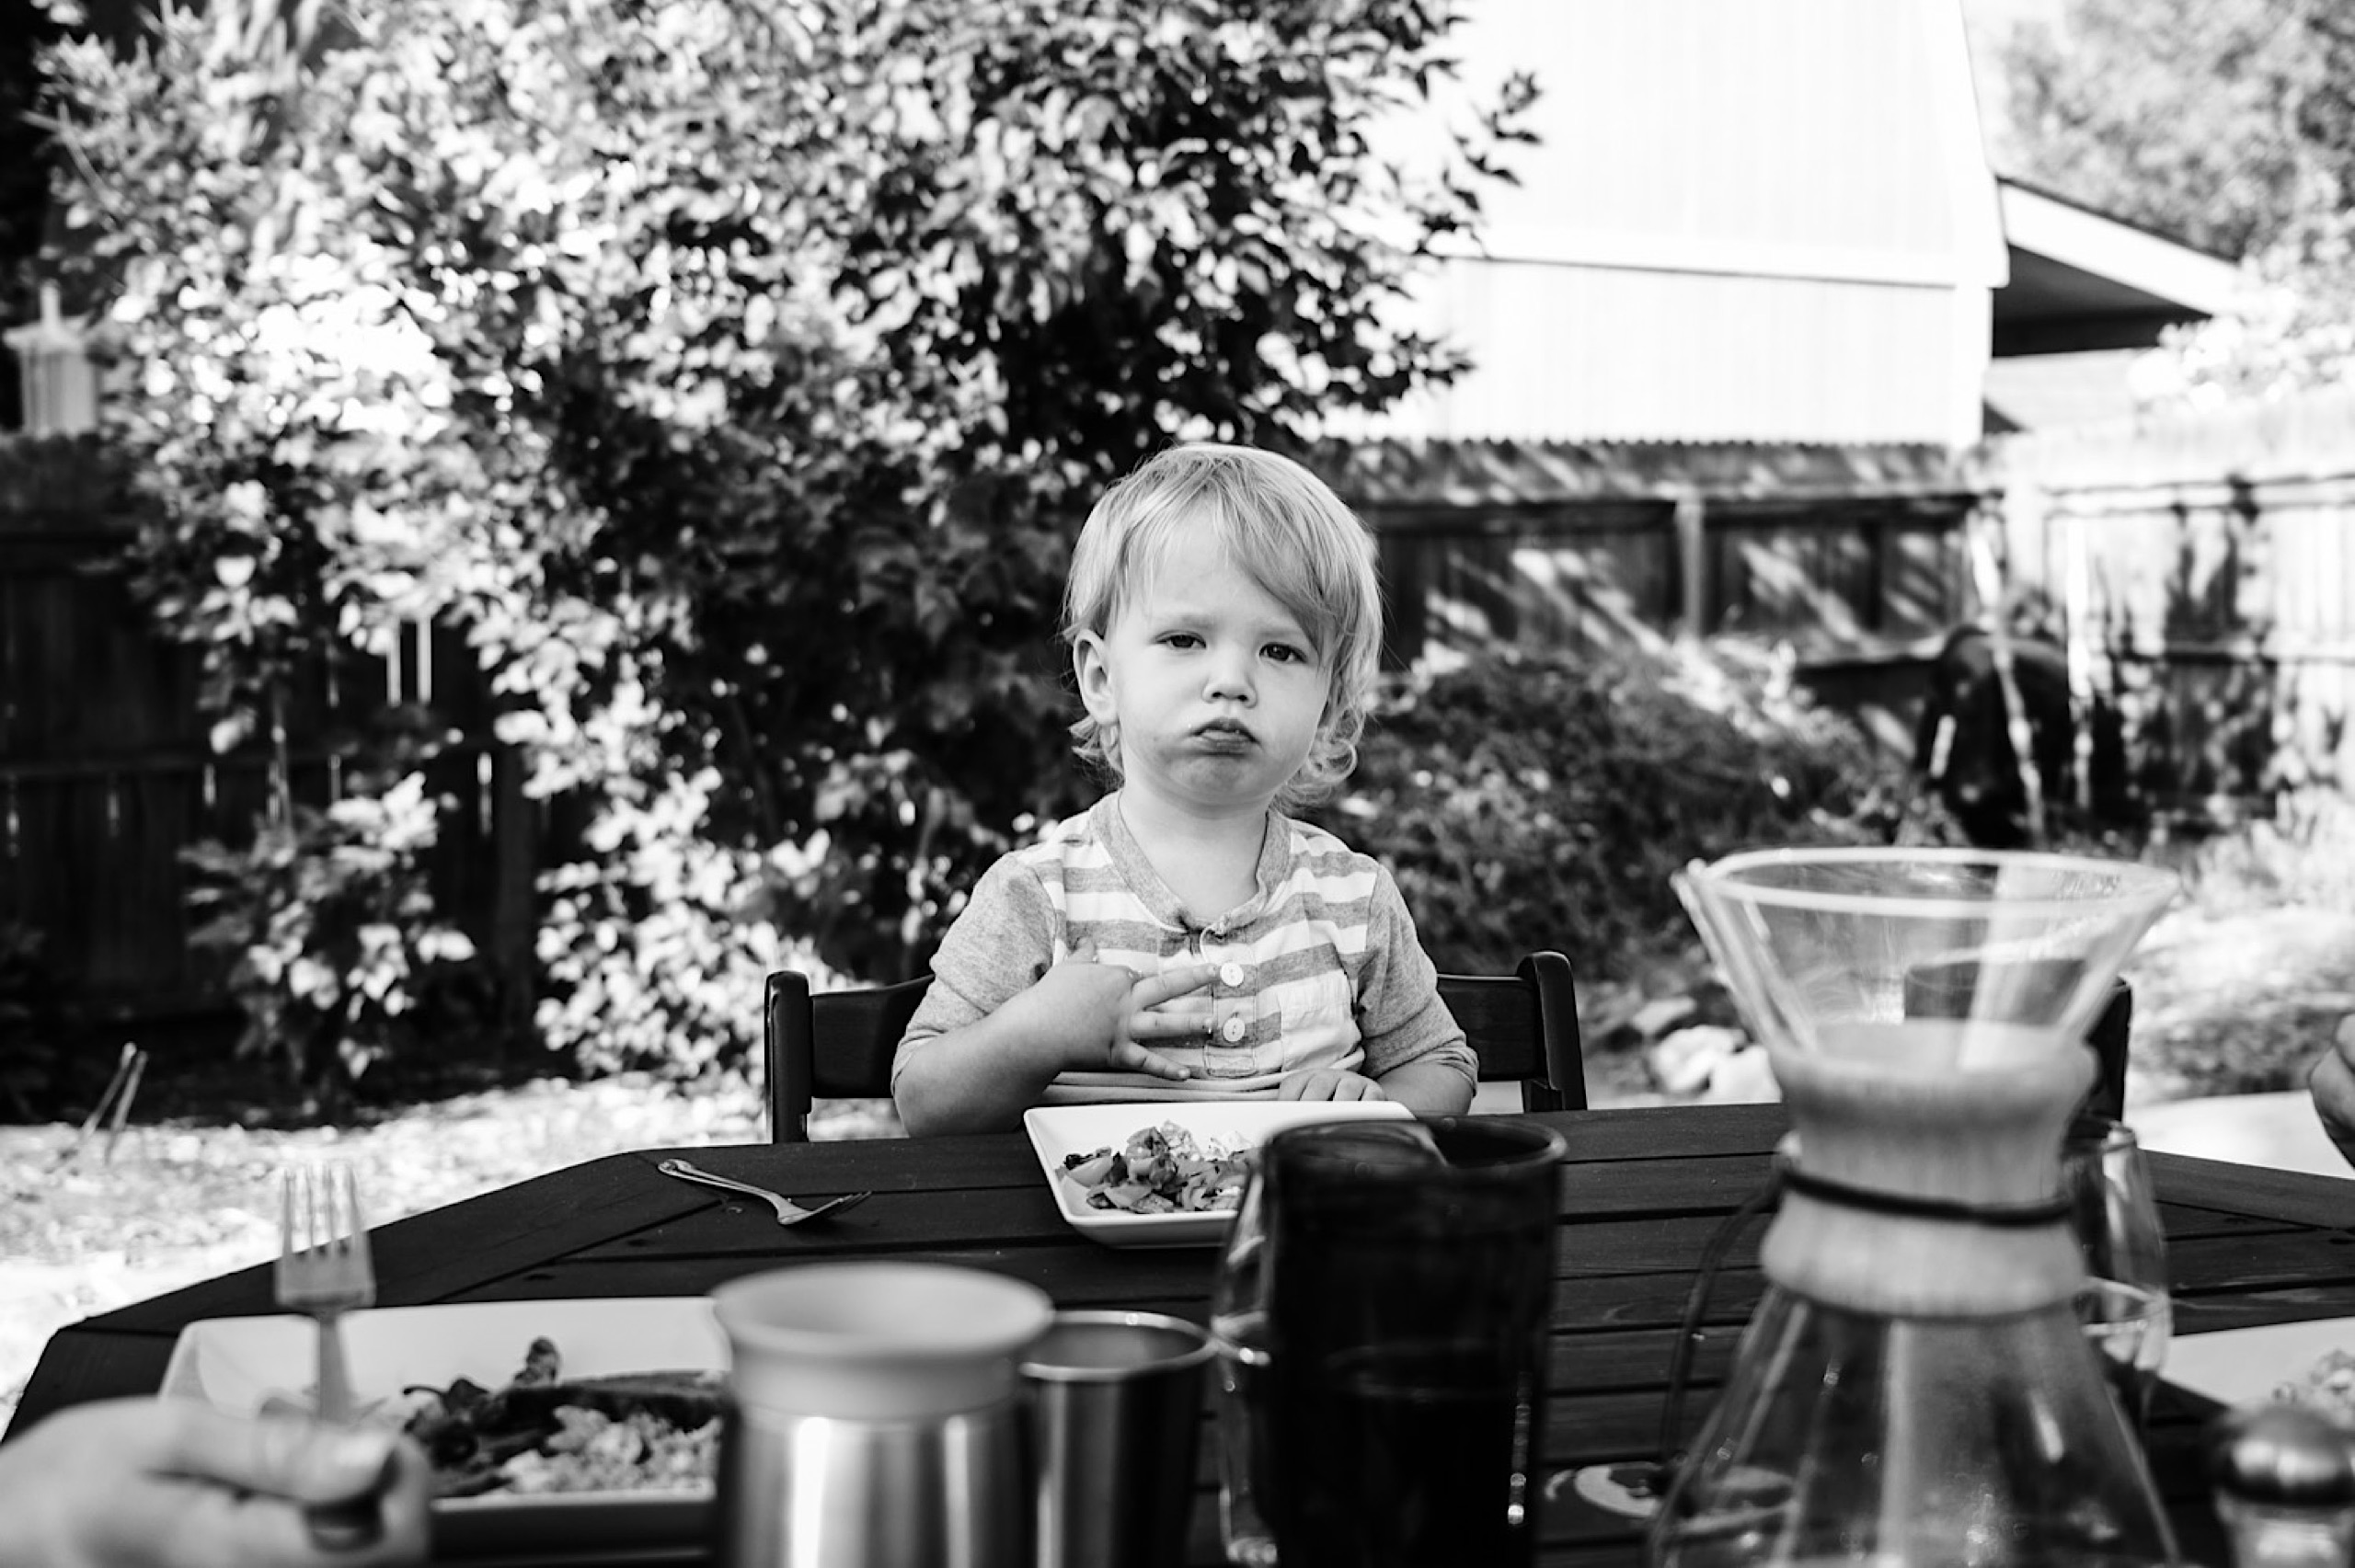 family photos in a pandemic, breakfast in the backyard